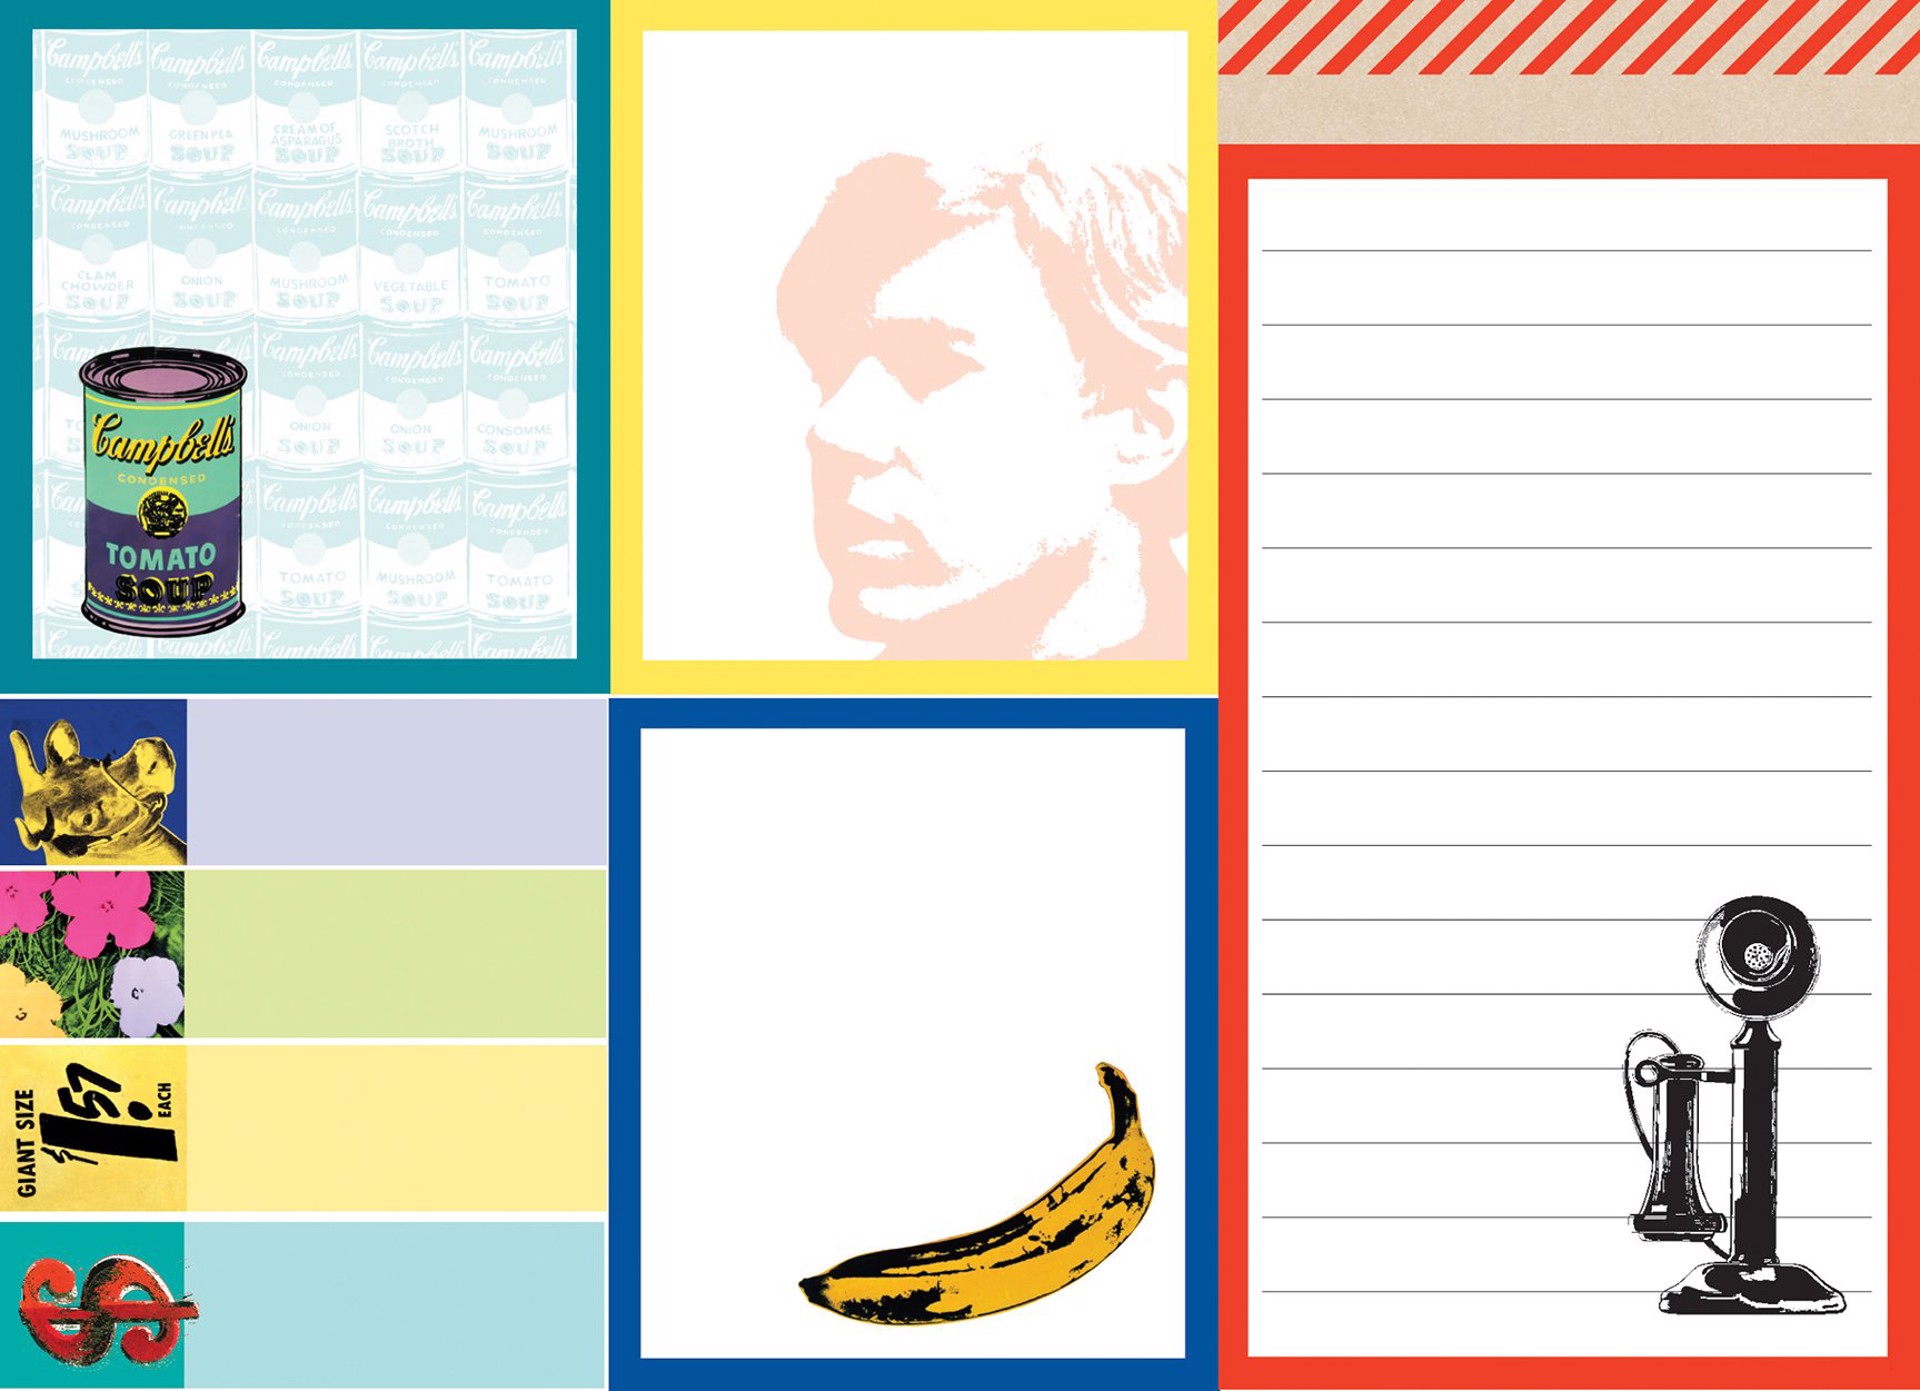 Warhol's Greatest Hits Sticky Notes by Andy Warhol